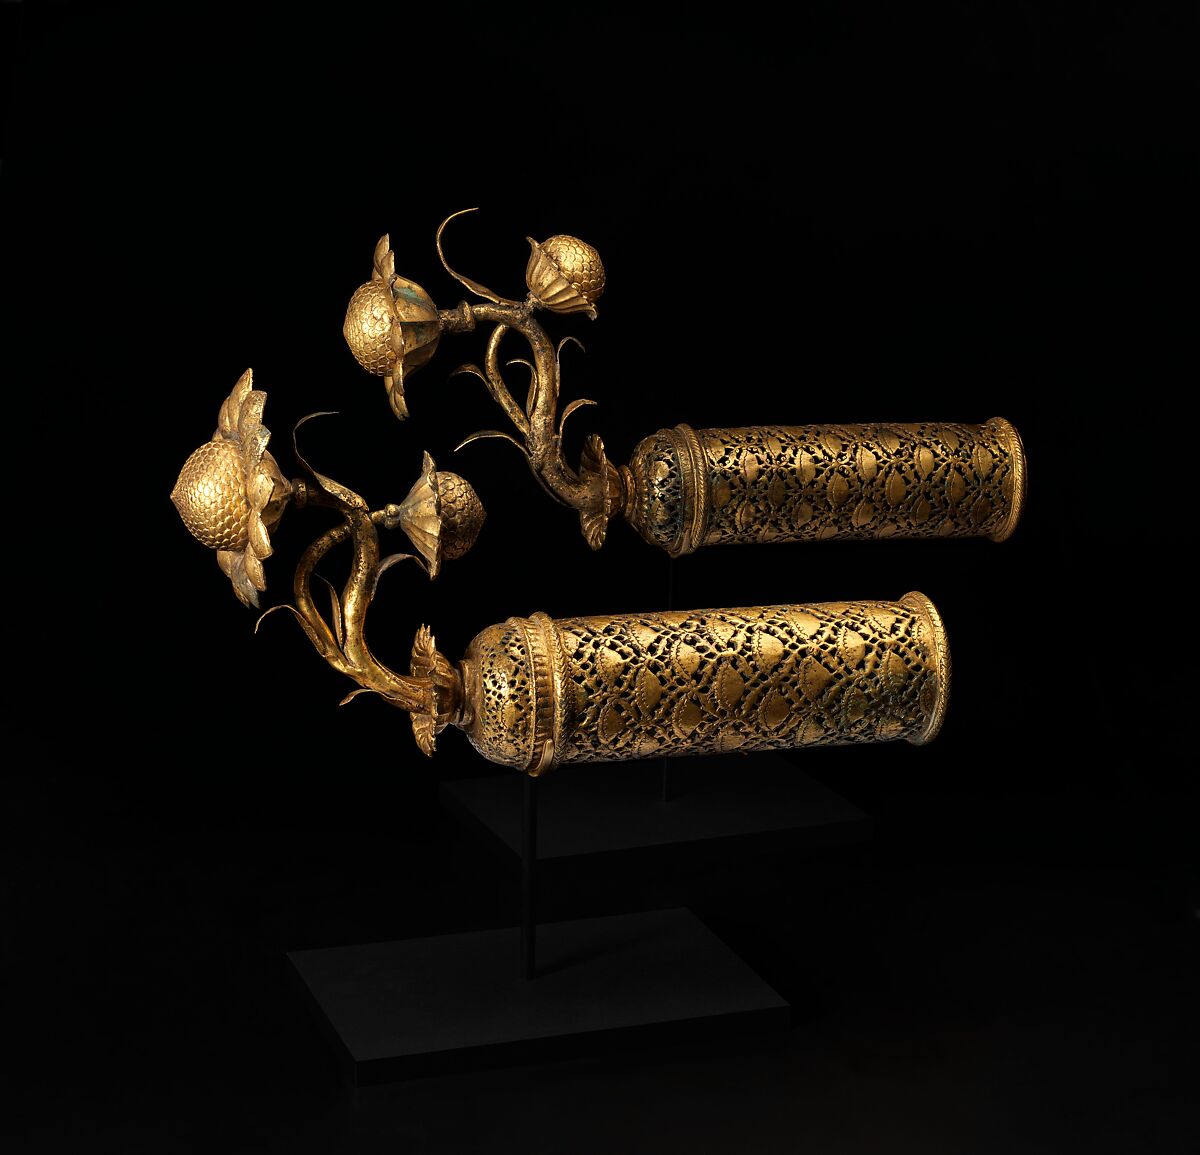 Palanquin Finials with Lotuses, Copper; cast, pierced, chased, and gilded 